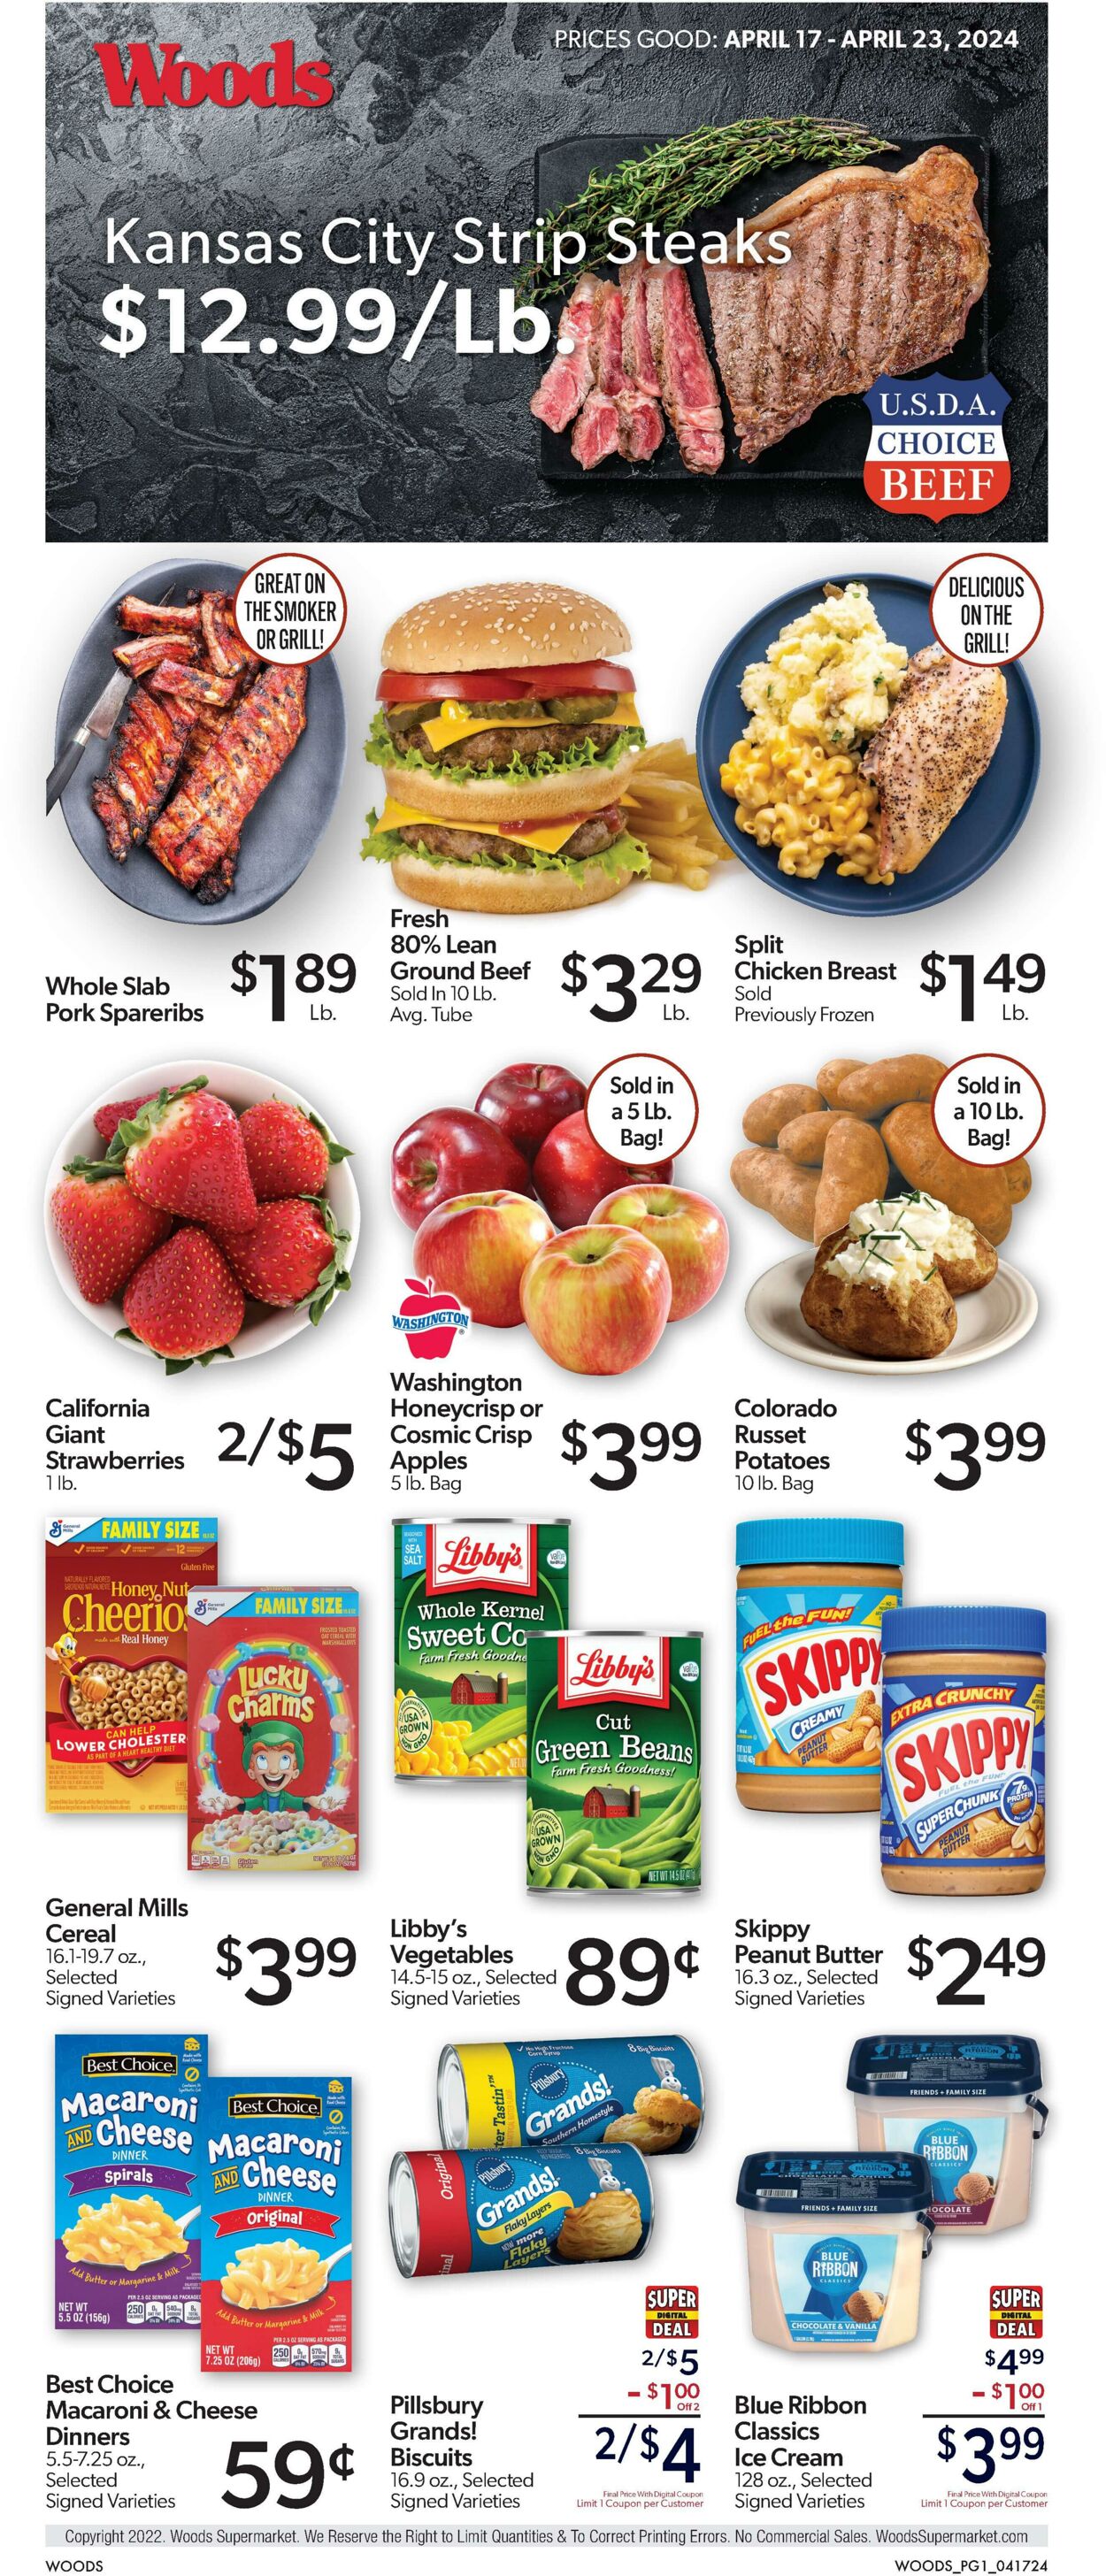 Woods Supermarket Promotional weekly ads